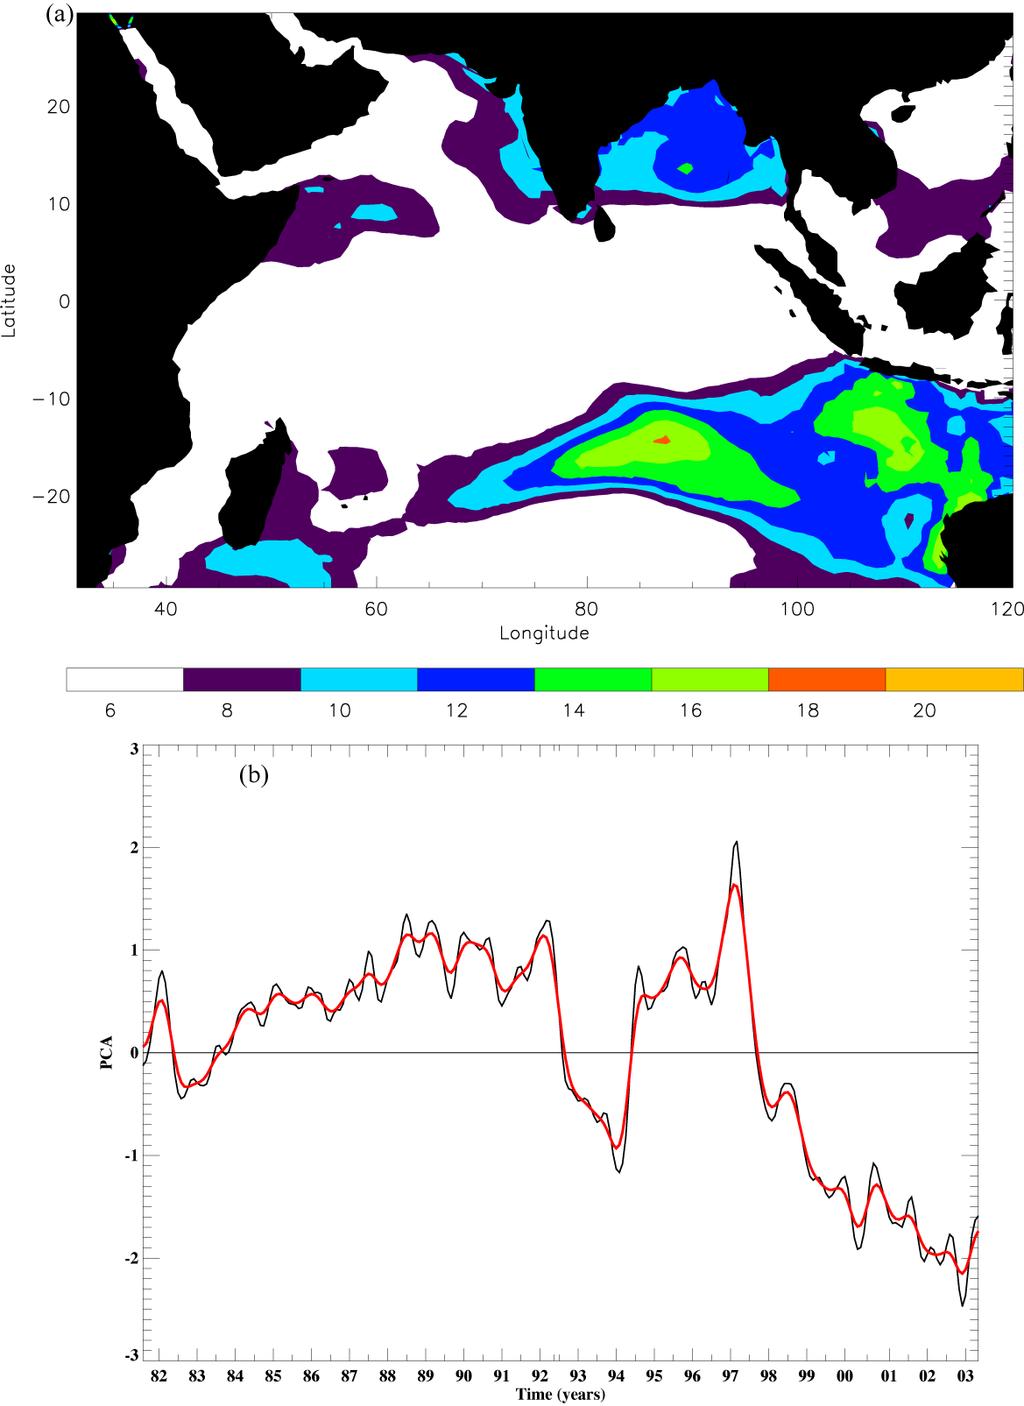 FIG. 8 First EOF (41.3% of the variance) of latent heat flux for the Indian Ocean.